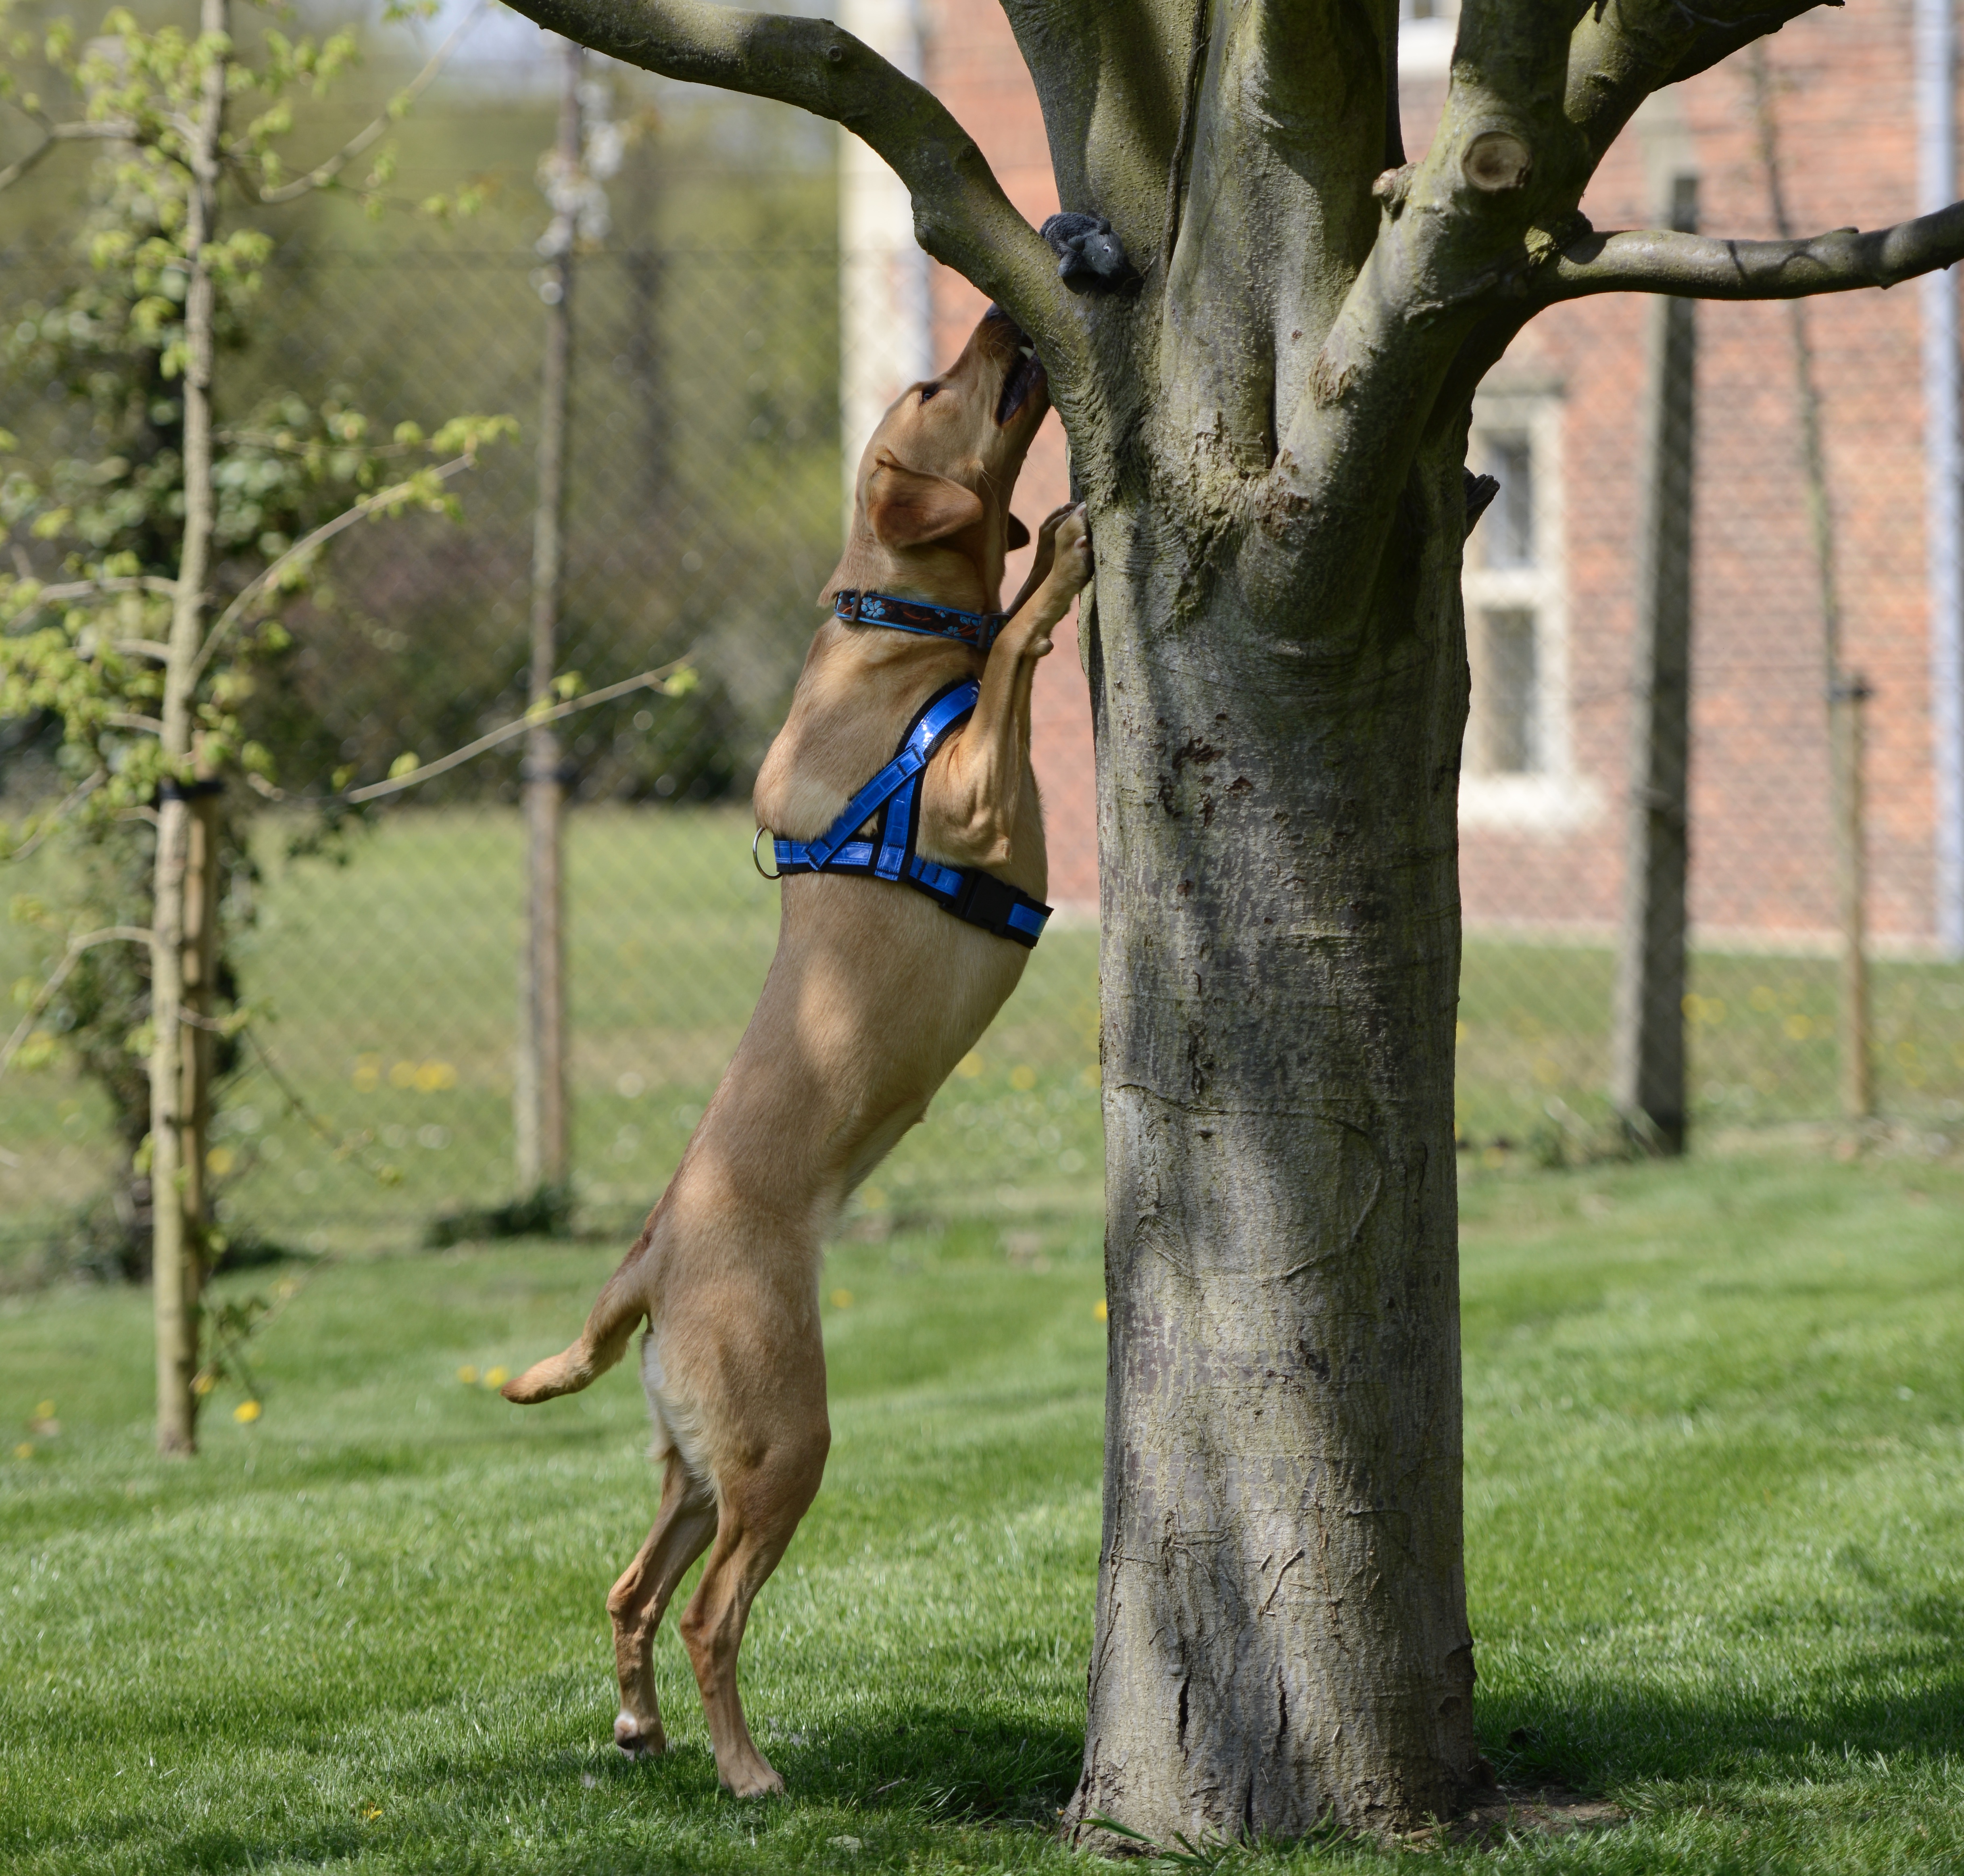 labrador scentwork dog stretches to find item up a tree